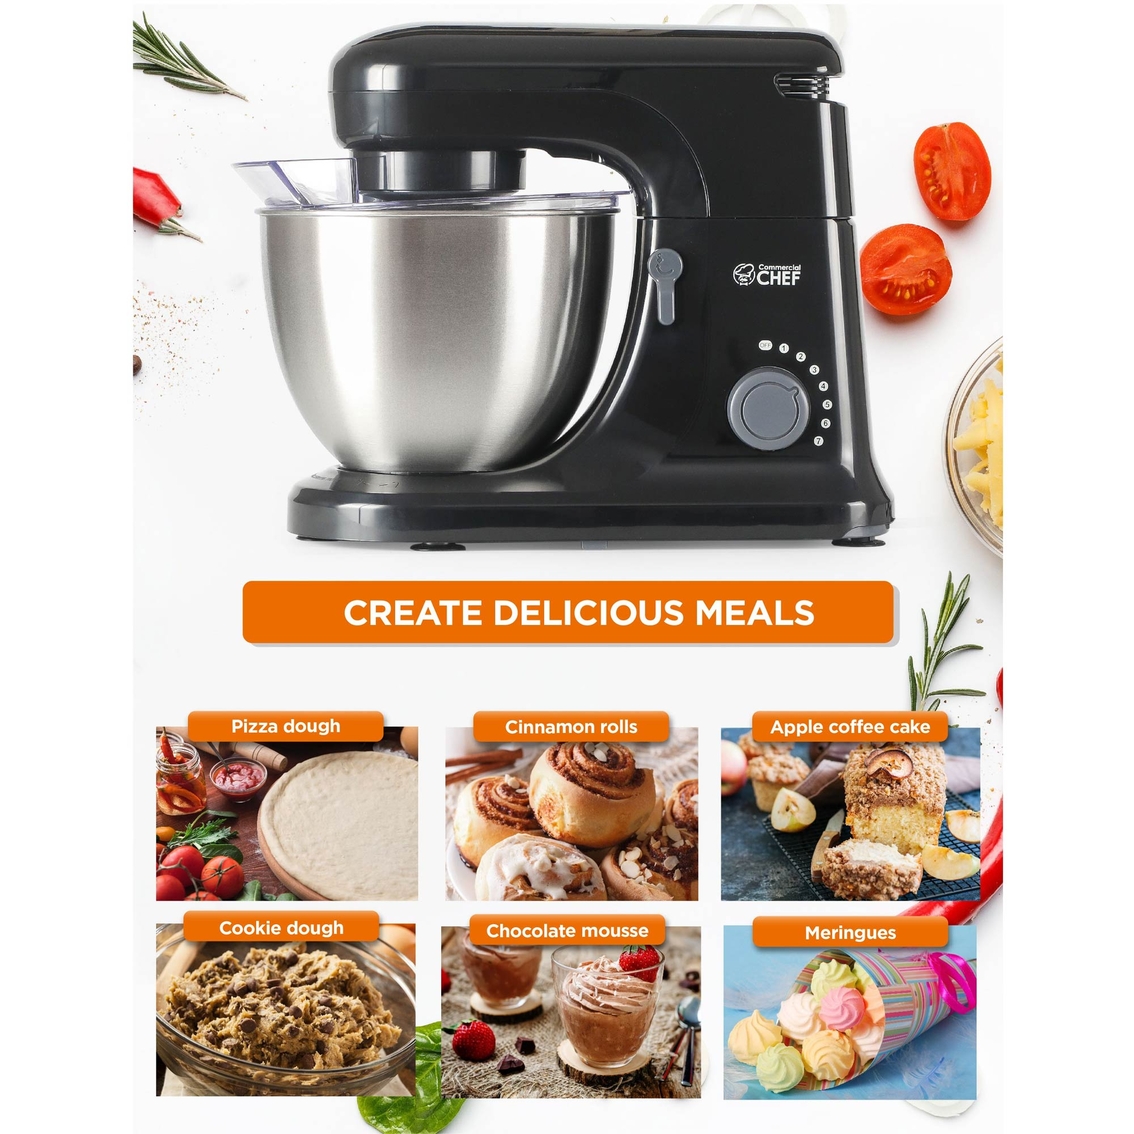 Commercial Chef 7 Speed Stand Mixer - Image 2 of 8